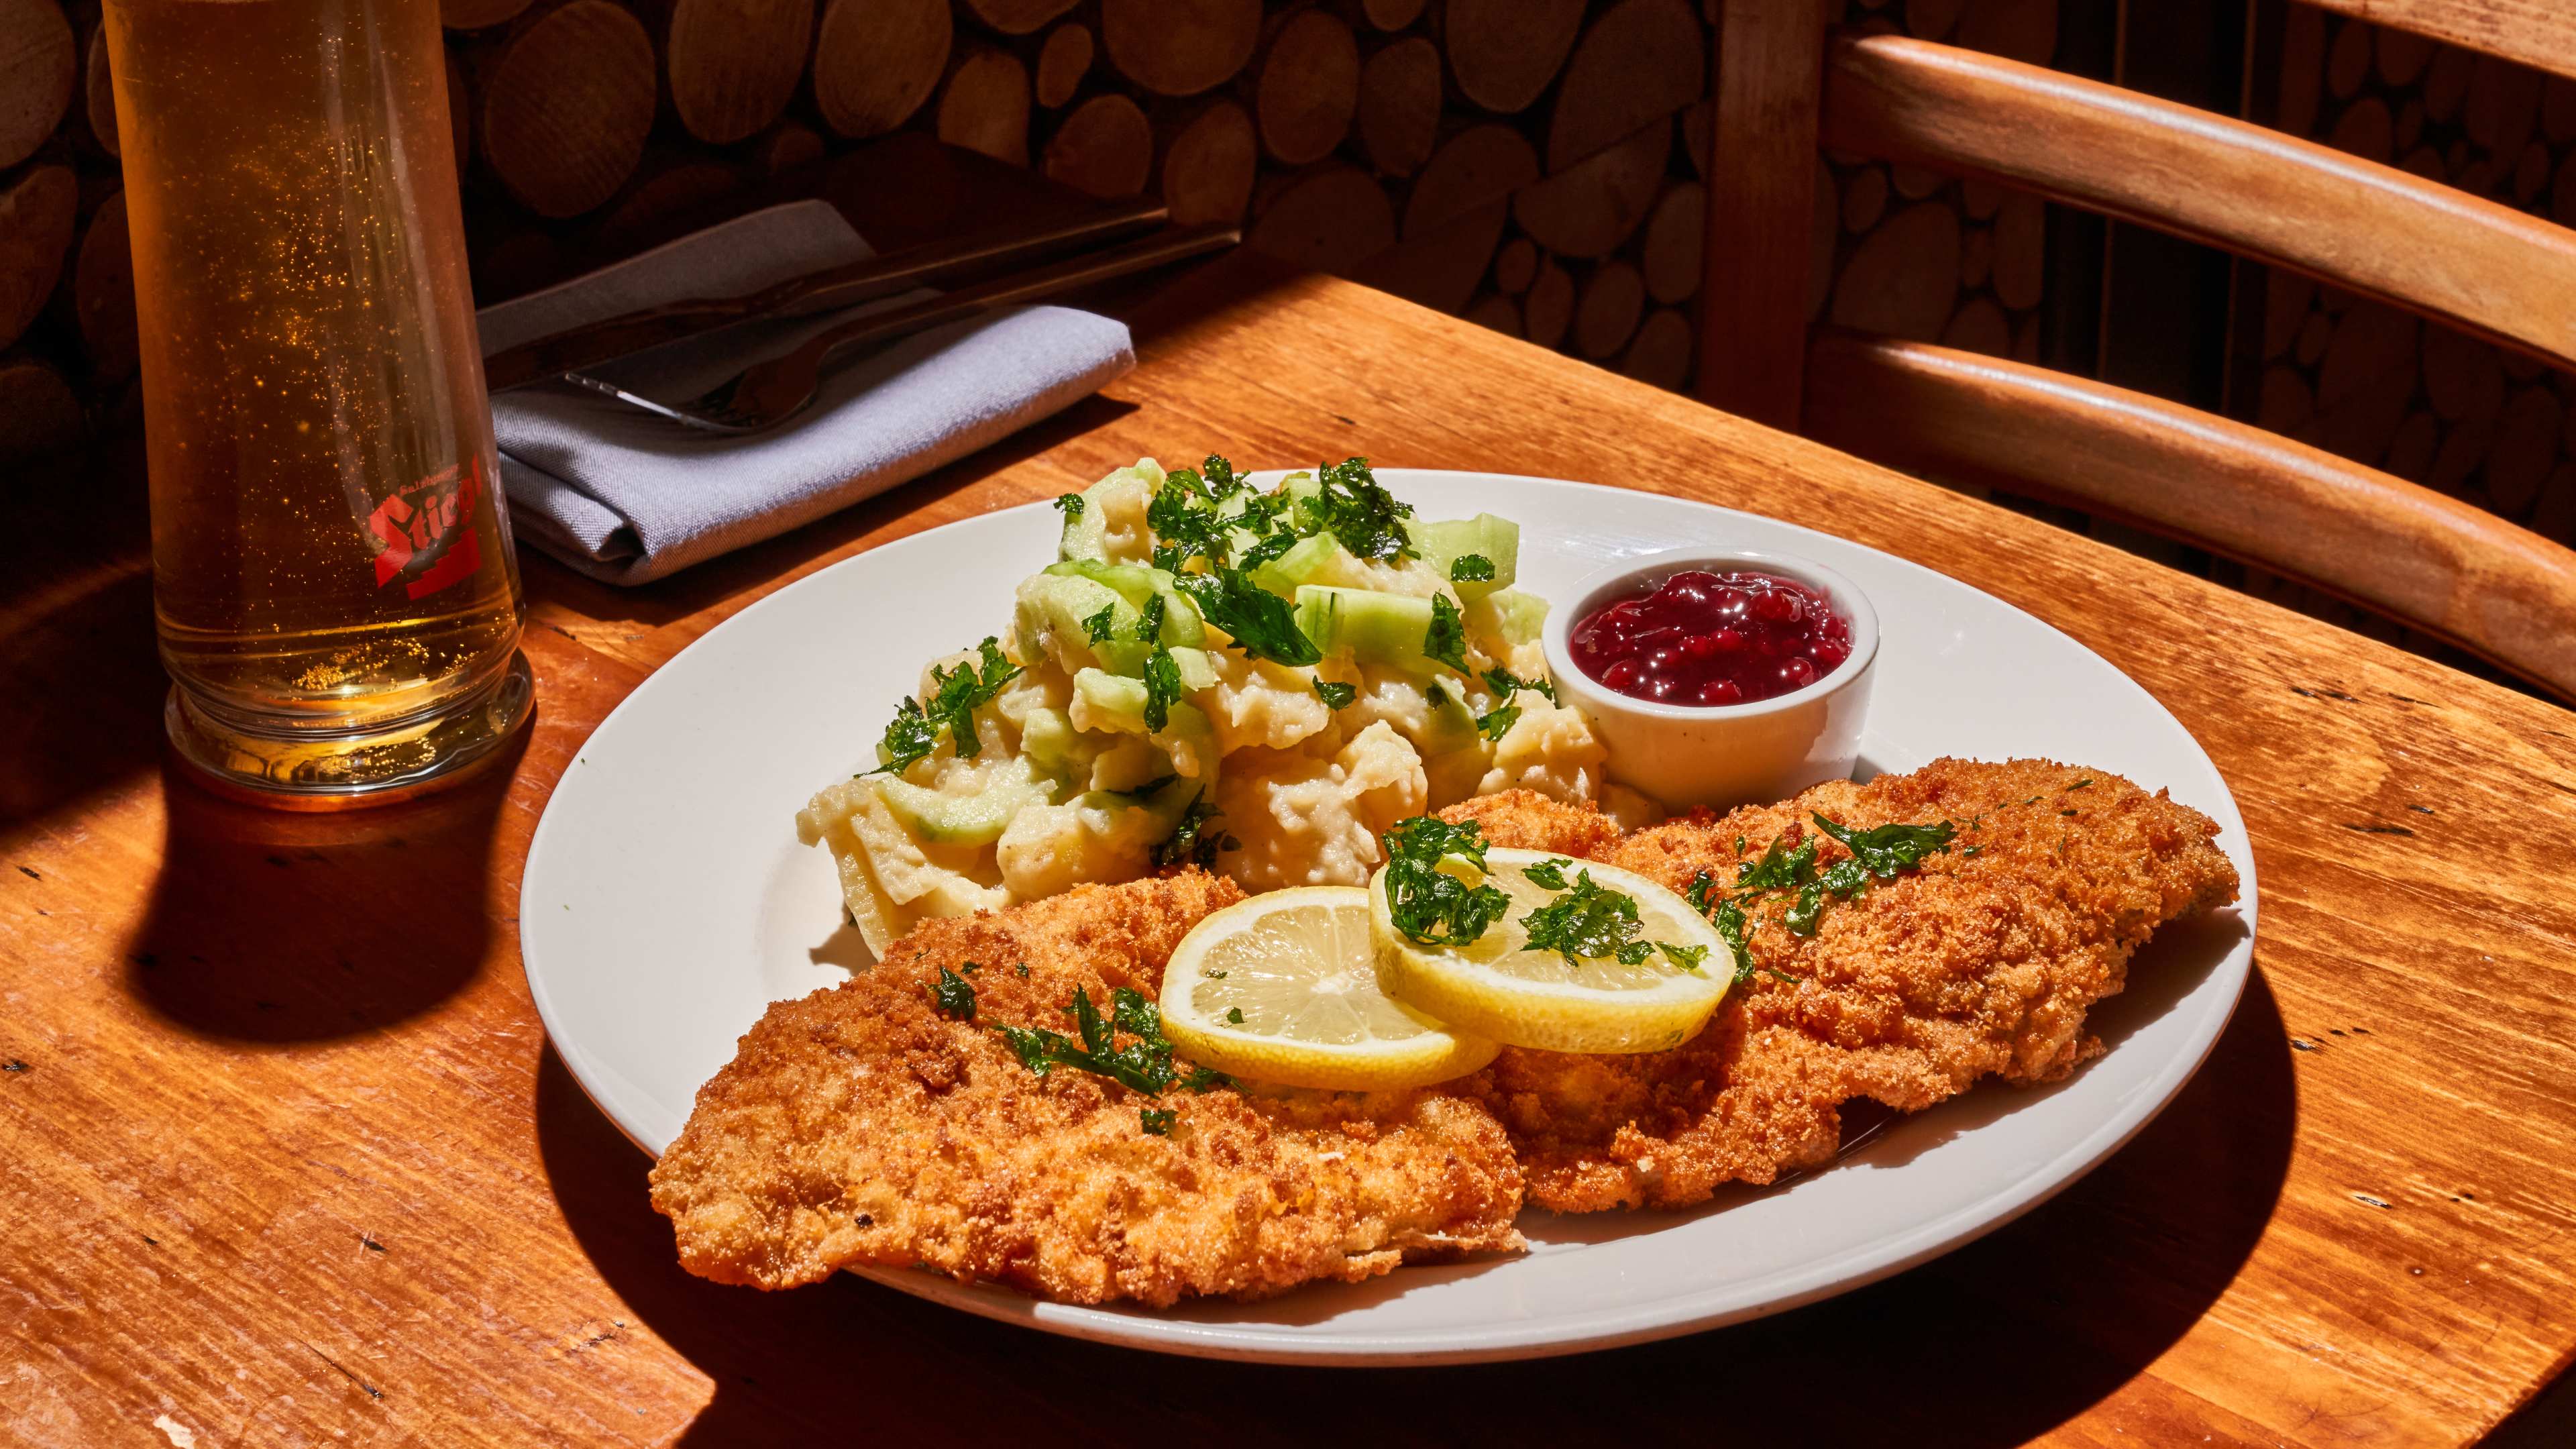 flat weiner schnitzel with lemon wedges, ketchup, and side salad